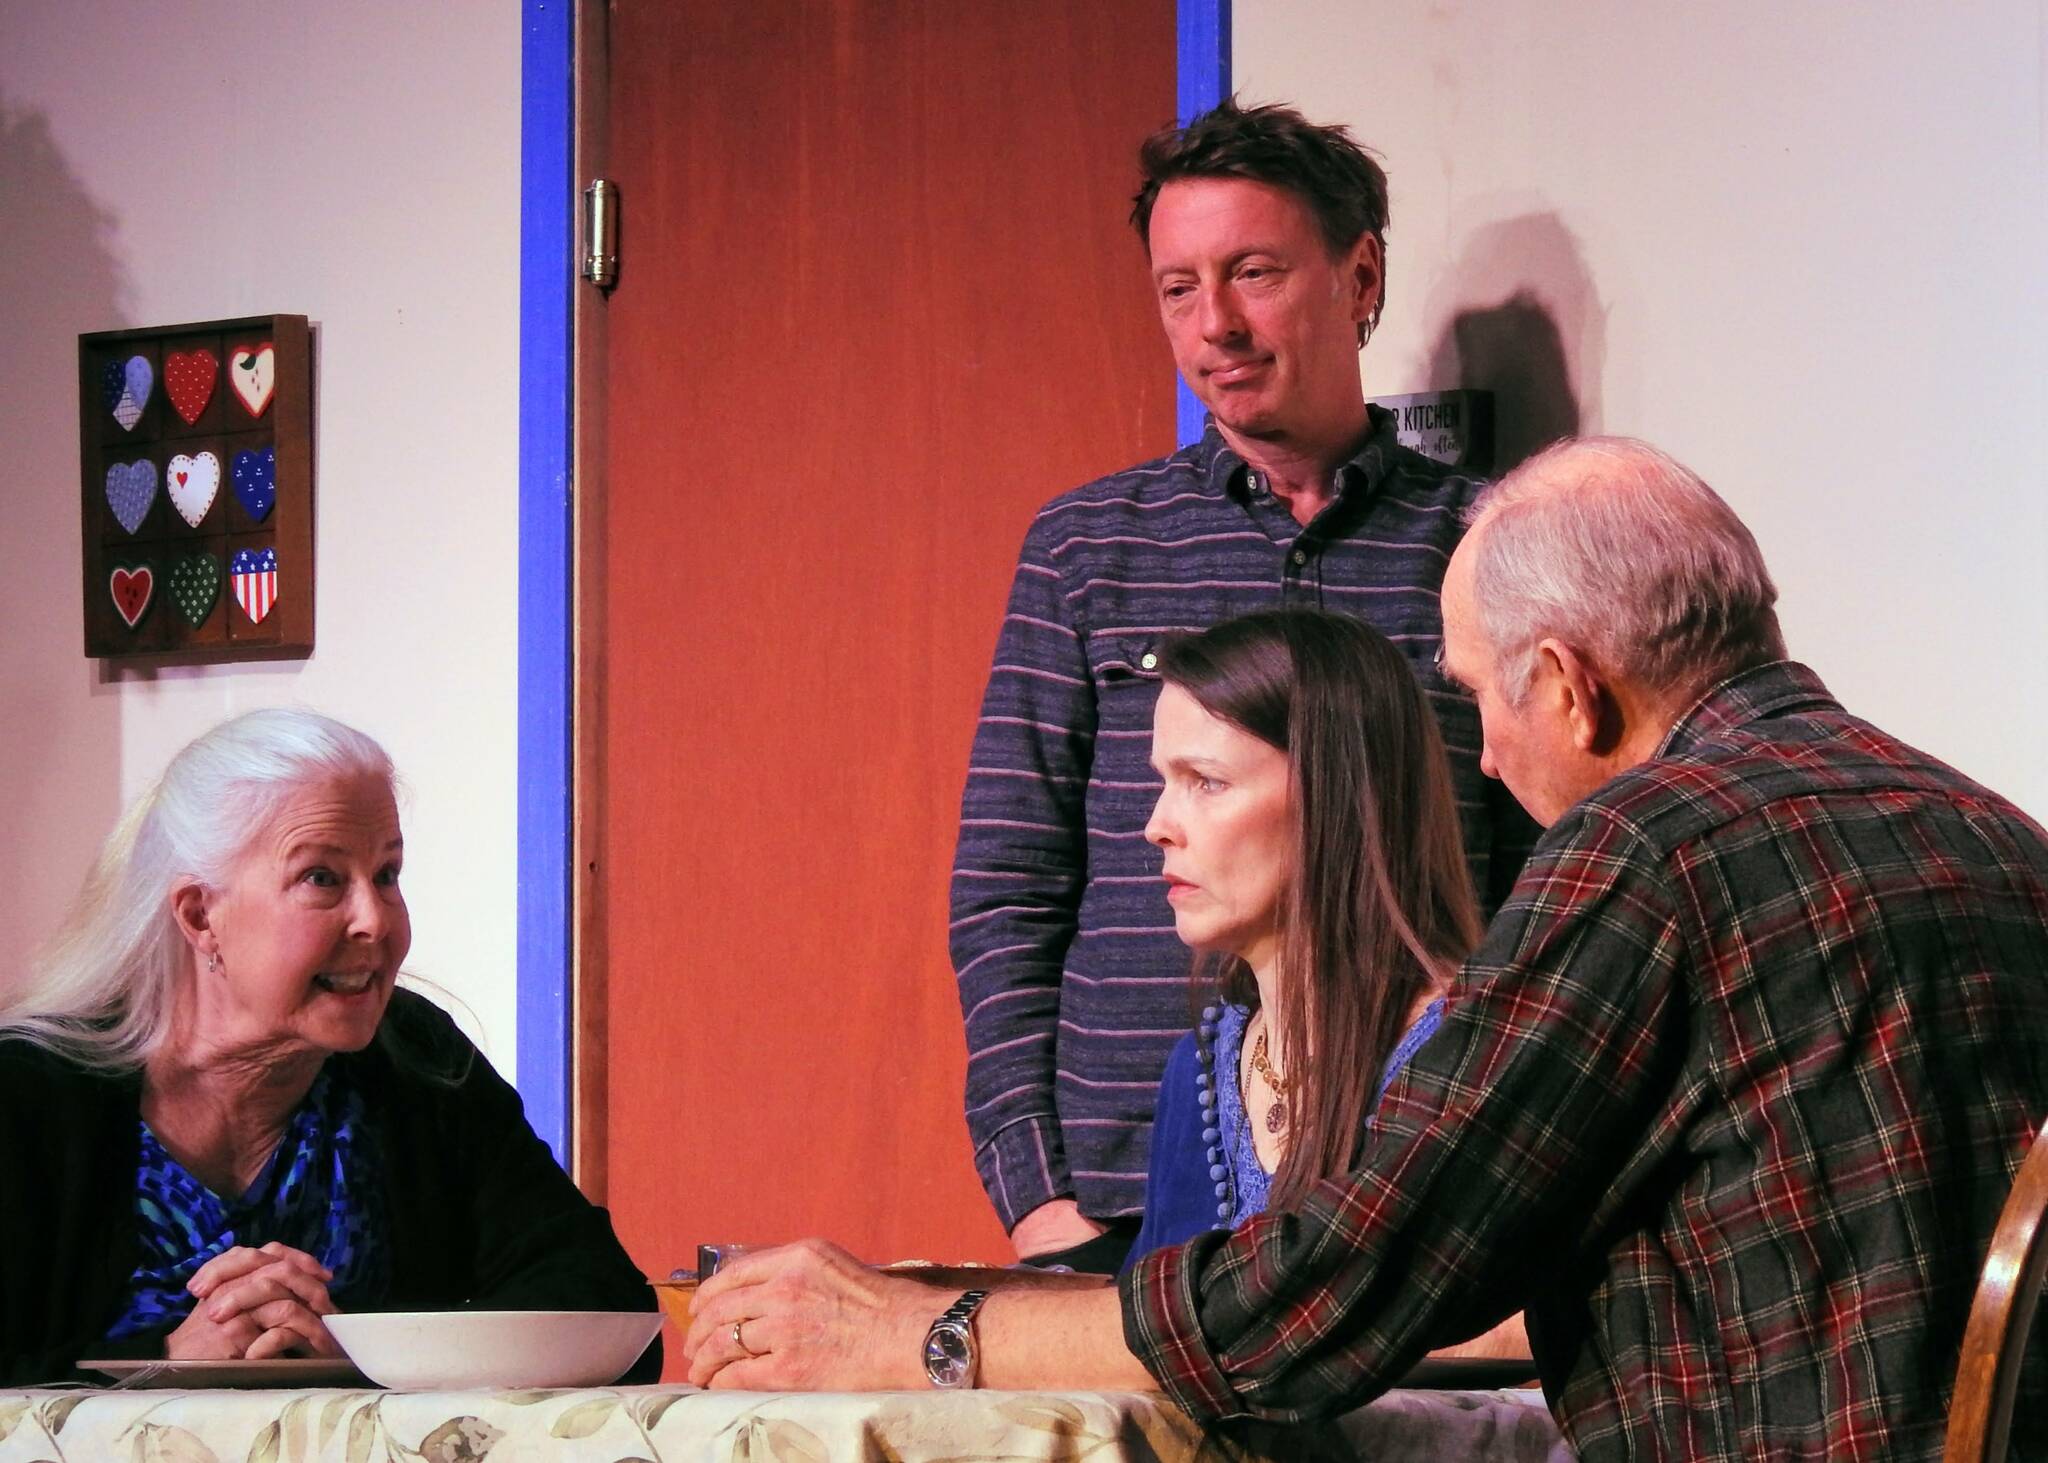 Contributed photo.
Dorrie Braun, Valerie Buxbaum, Morgan Dews and Tom Fiscus in “The Tin Woman.”